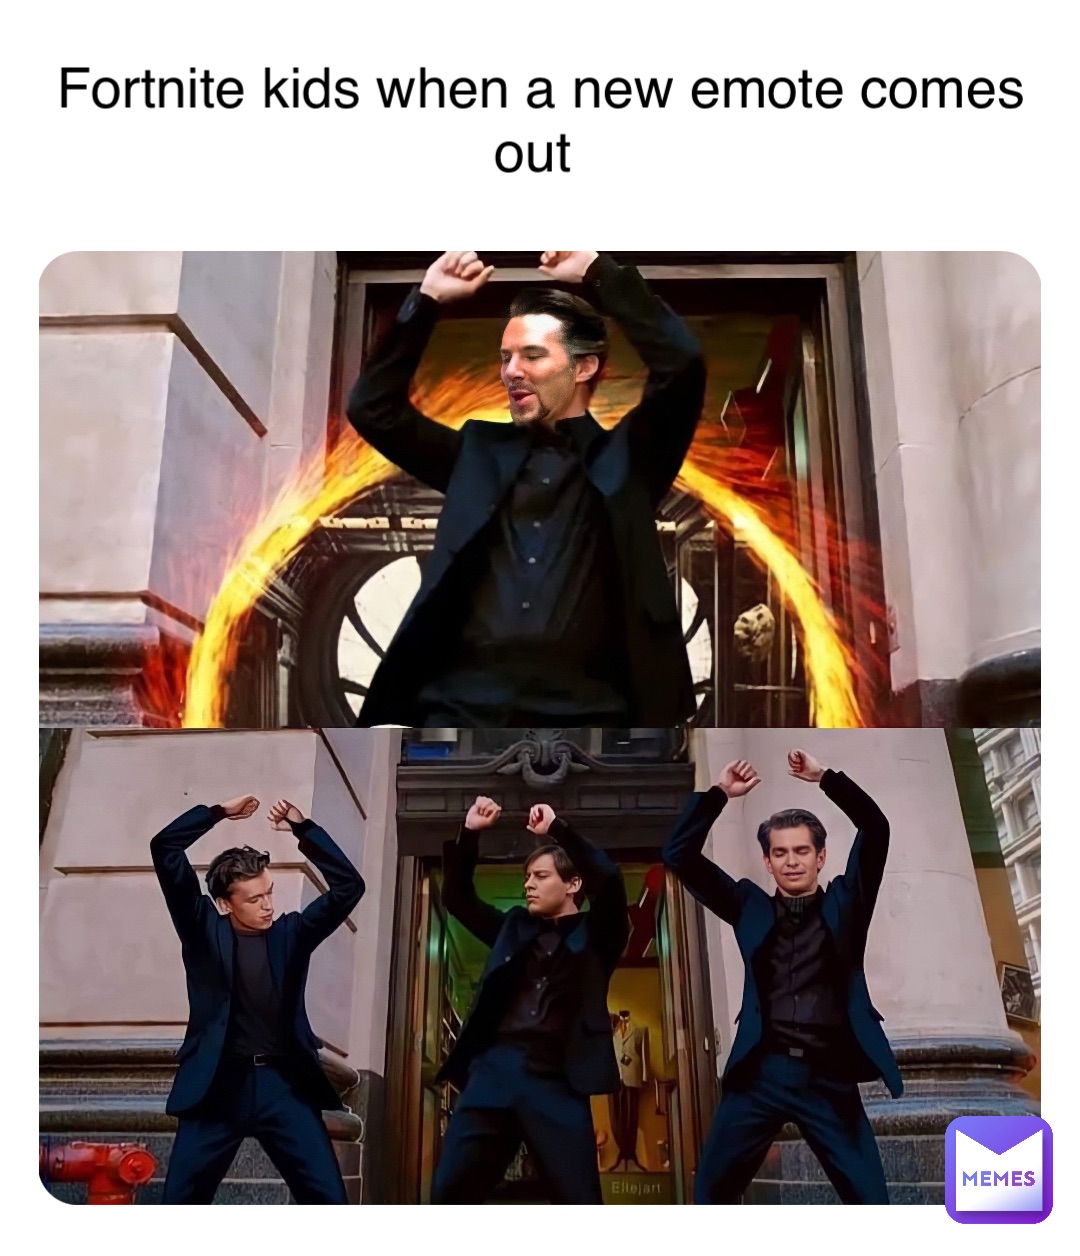 Fortnite kids when a new emote comes out